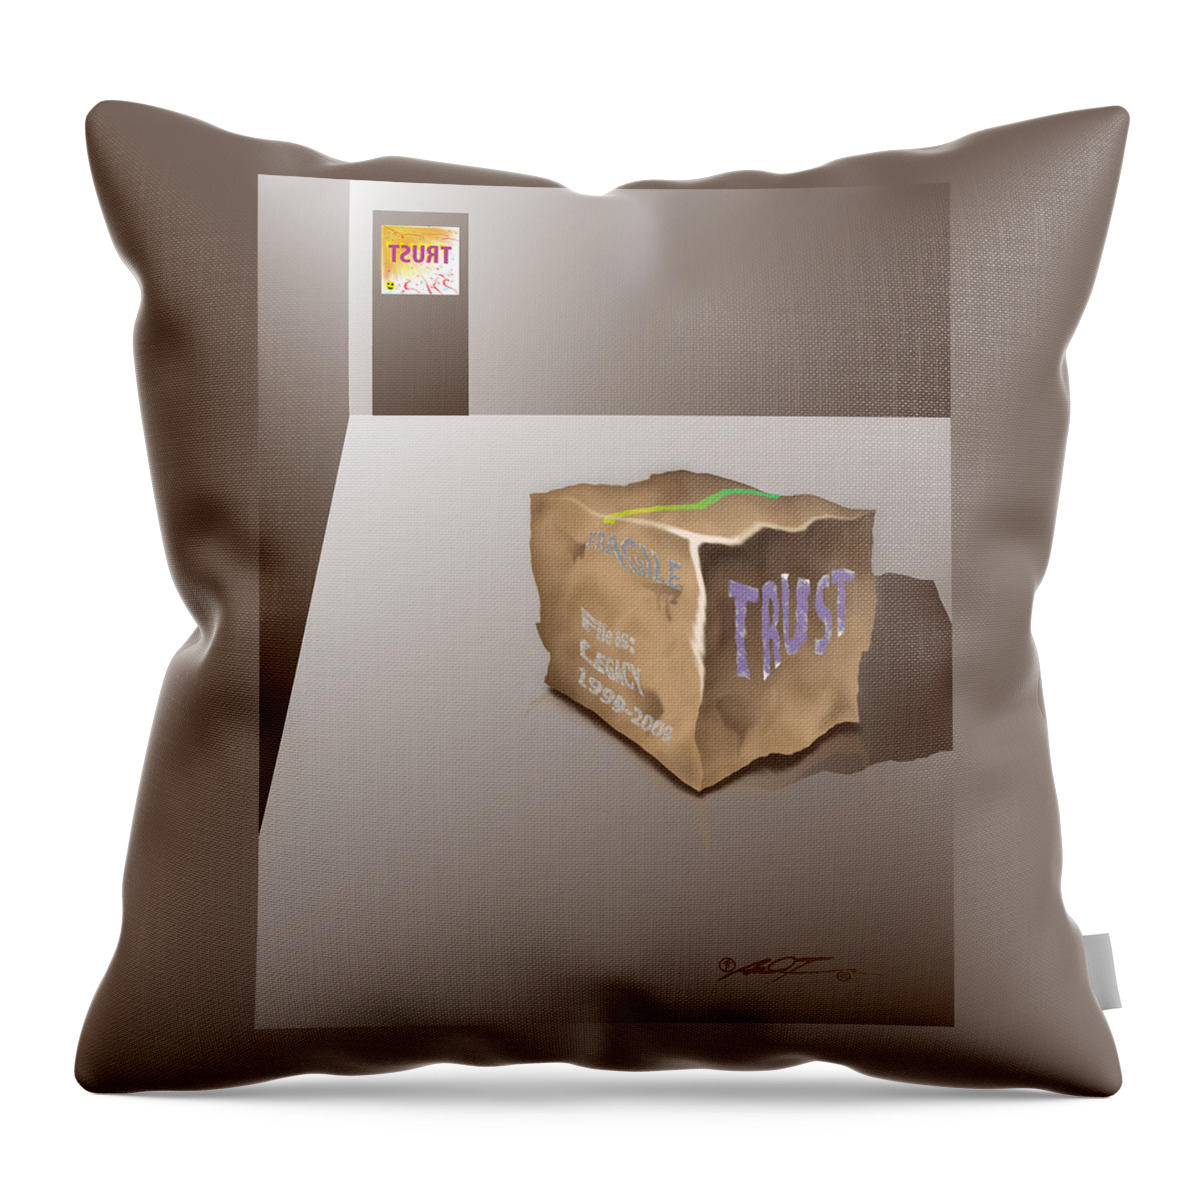 Editorial Throw Pillow featuring the digital art Death of Trust by Dale Turner